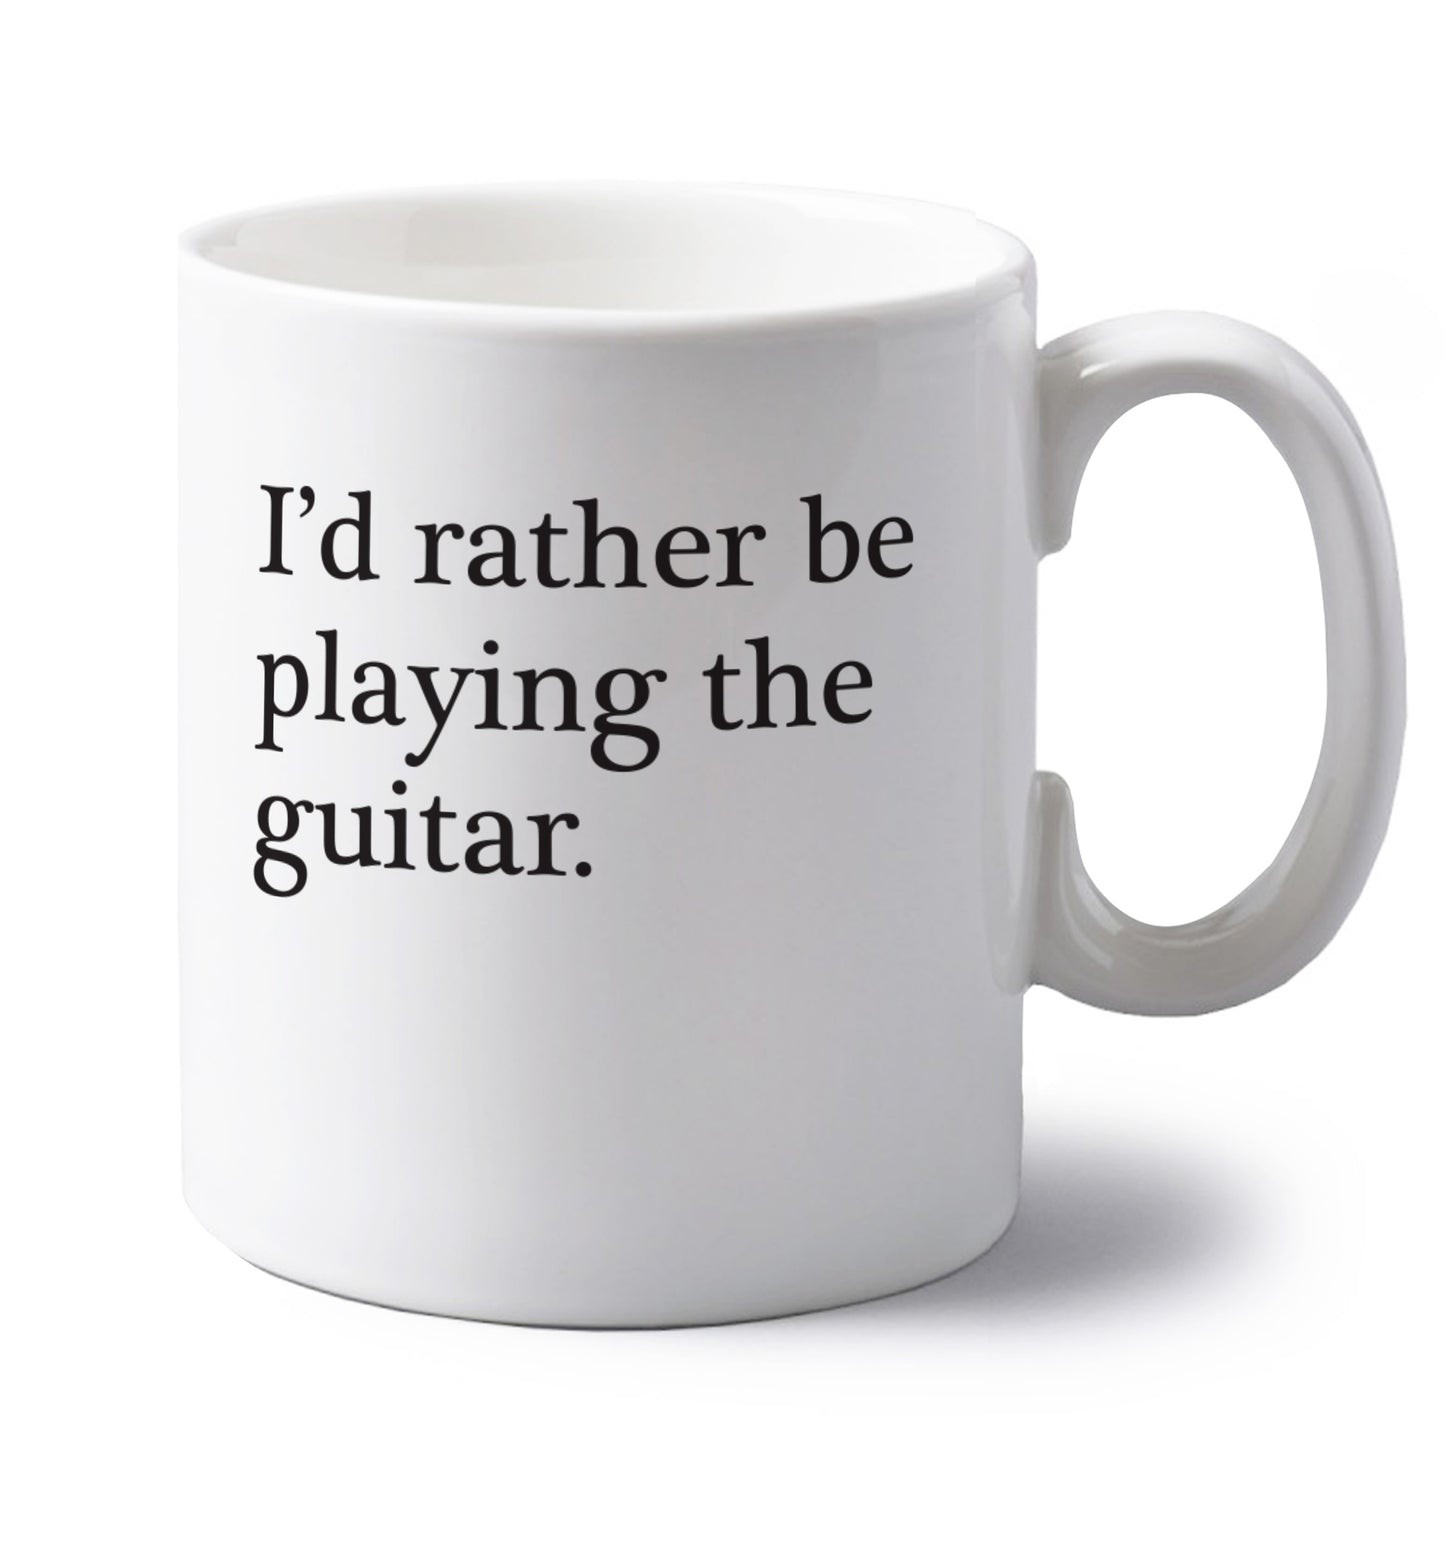 I'd rather be playing the guitar left handed white ceramic mug 